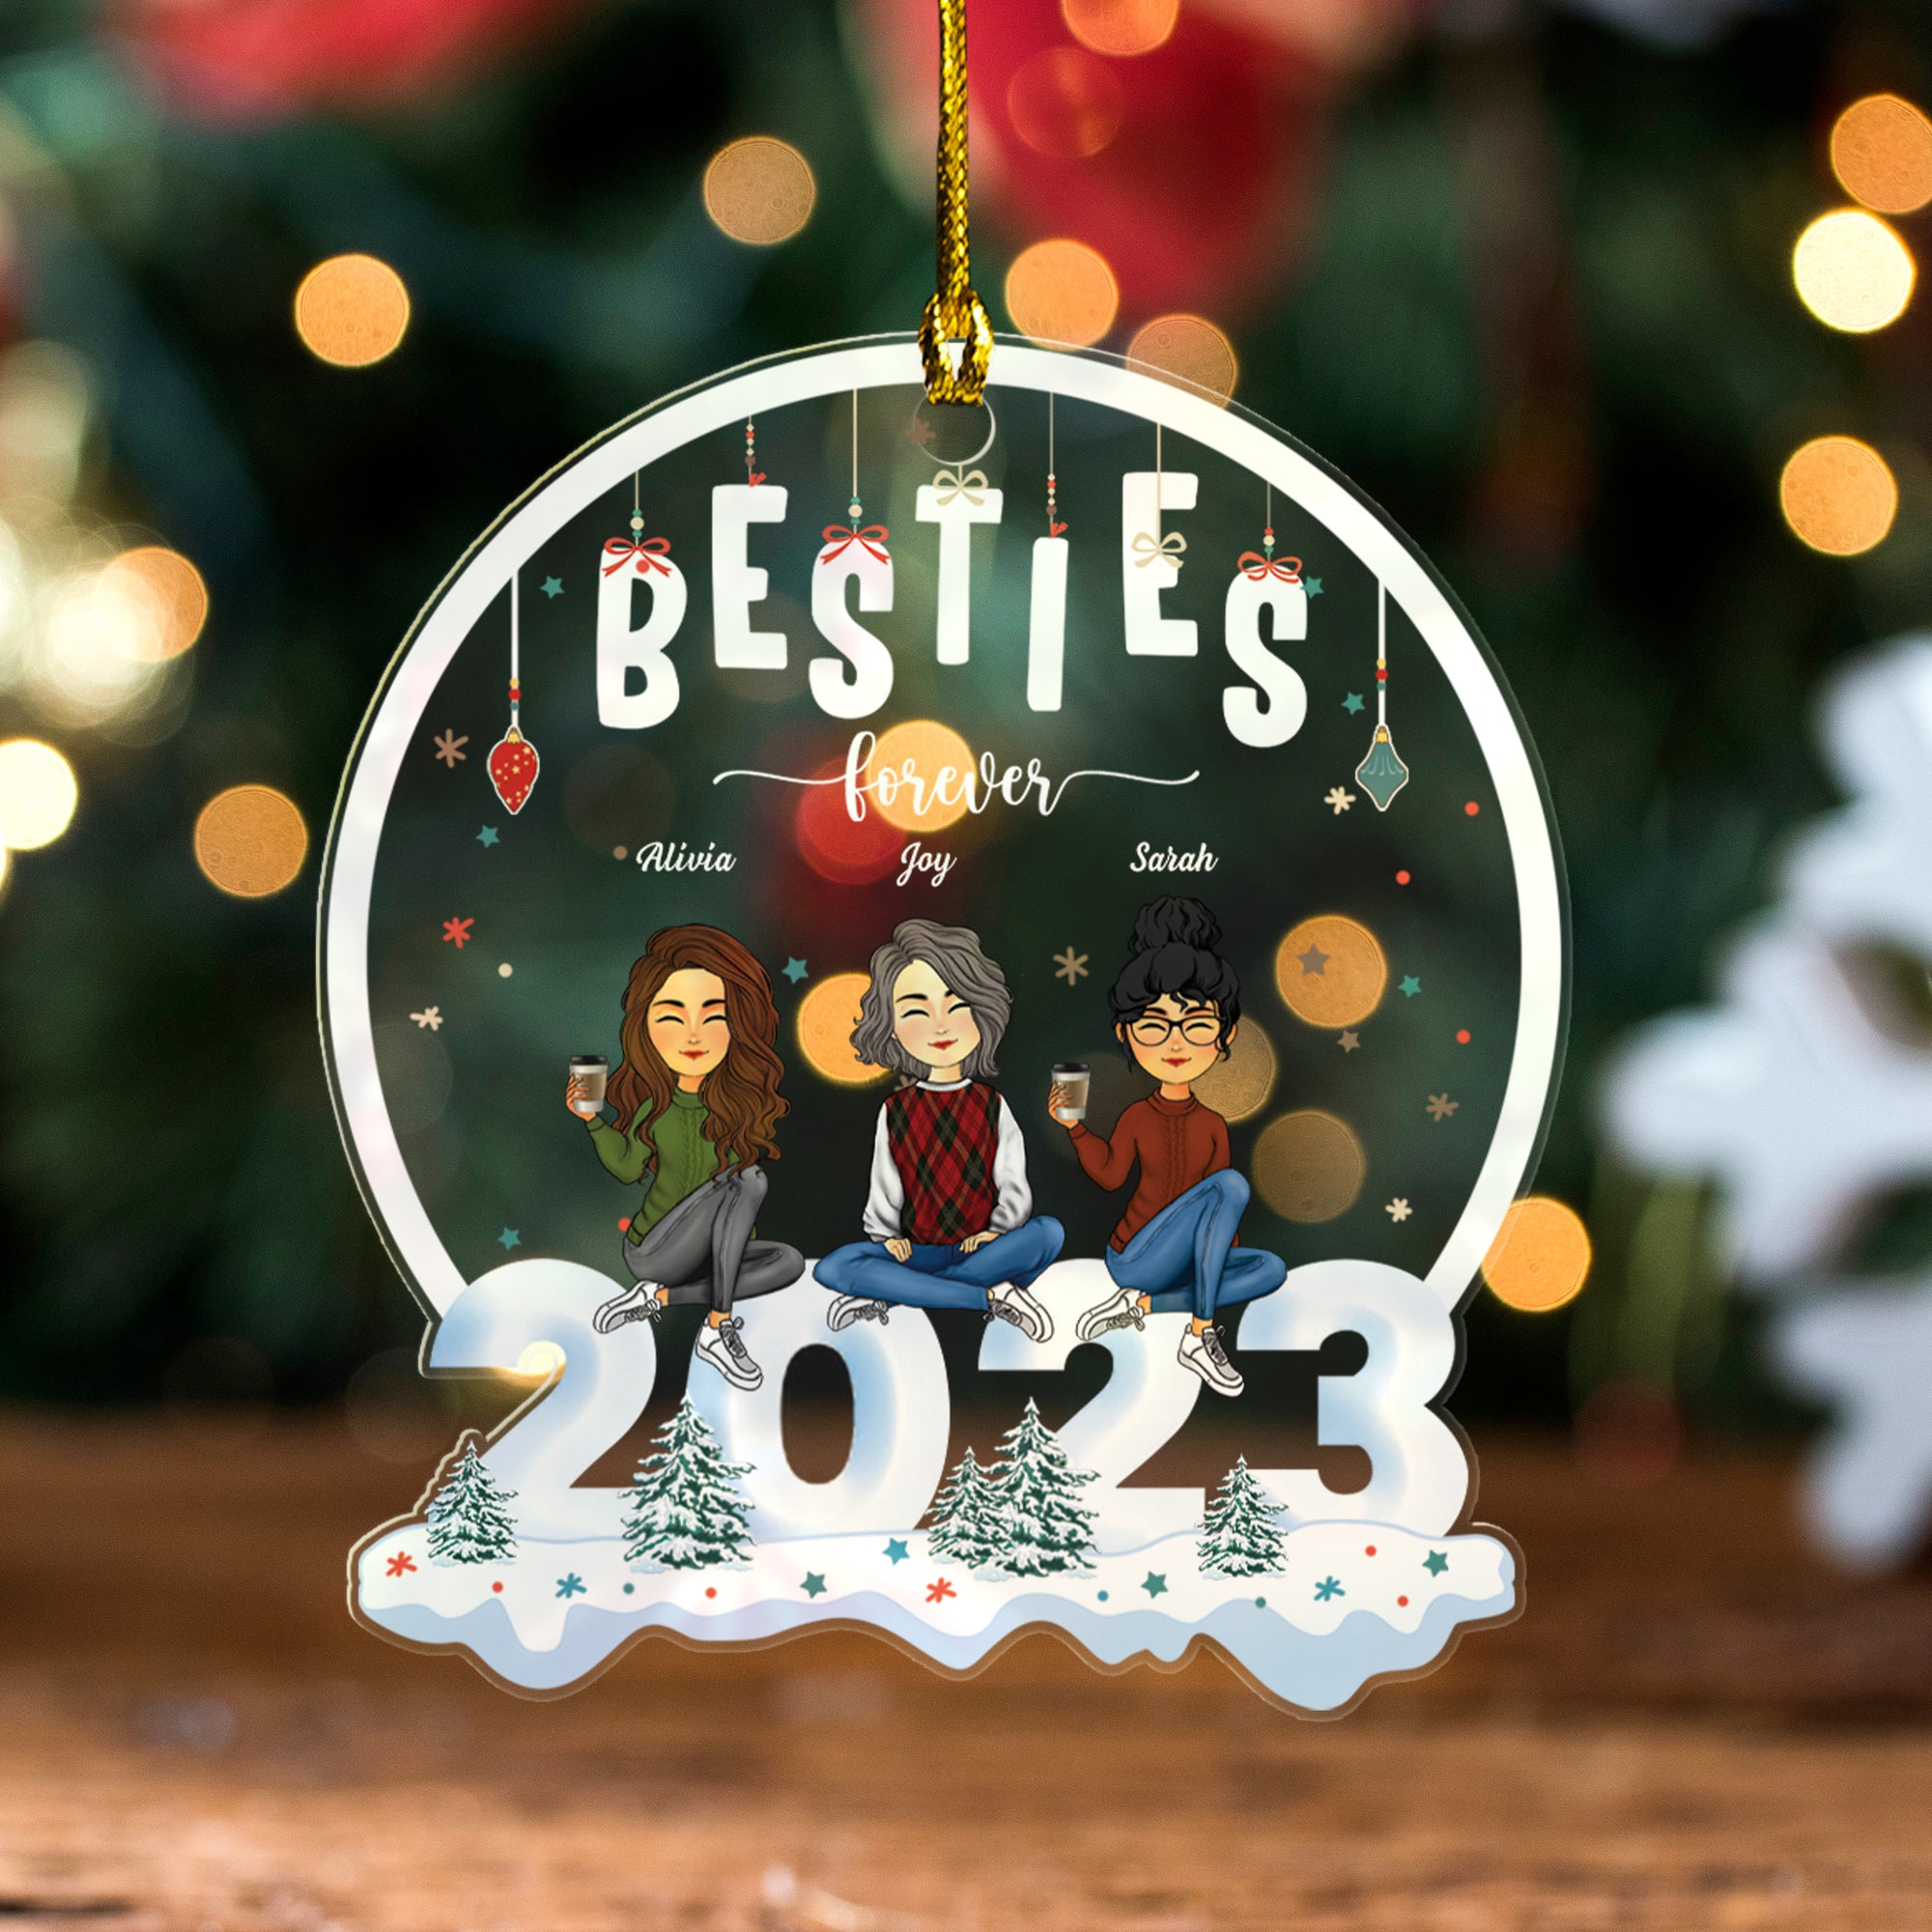 Besties Forever - Christmas Gift - Gift For BFF, Best Friends - Personalized Custom Shape Acrylic Ornament